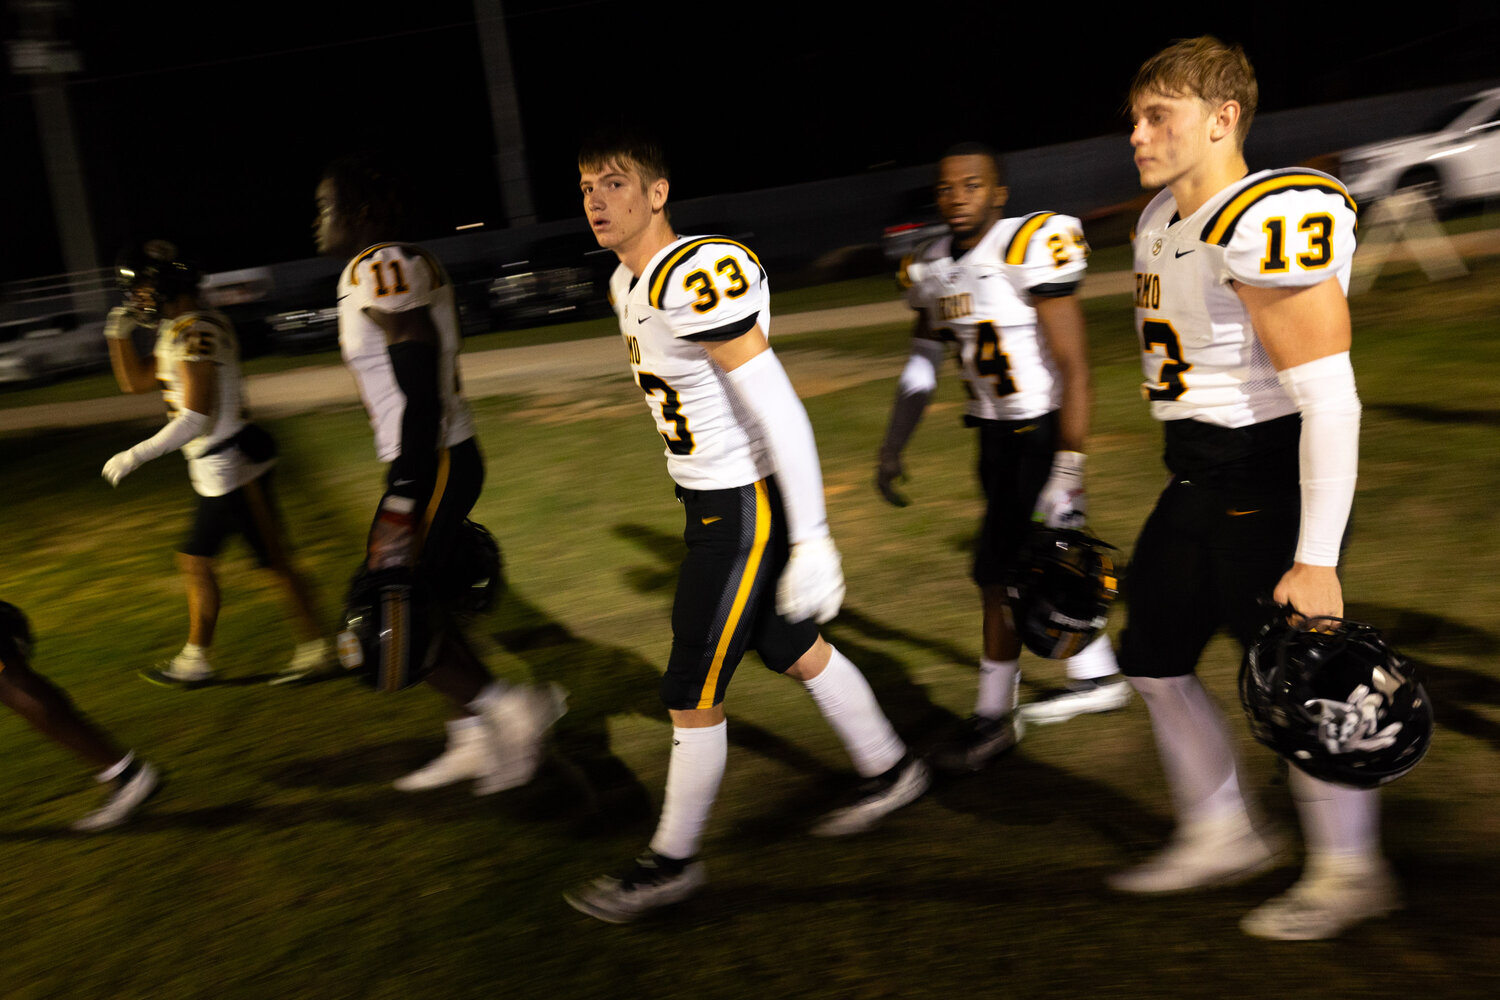 Irmo players return to the field at the conclusion of halftime at Kellytown Stadium.